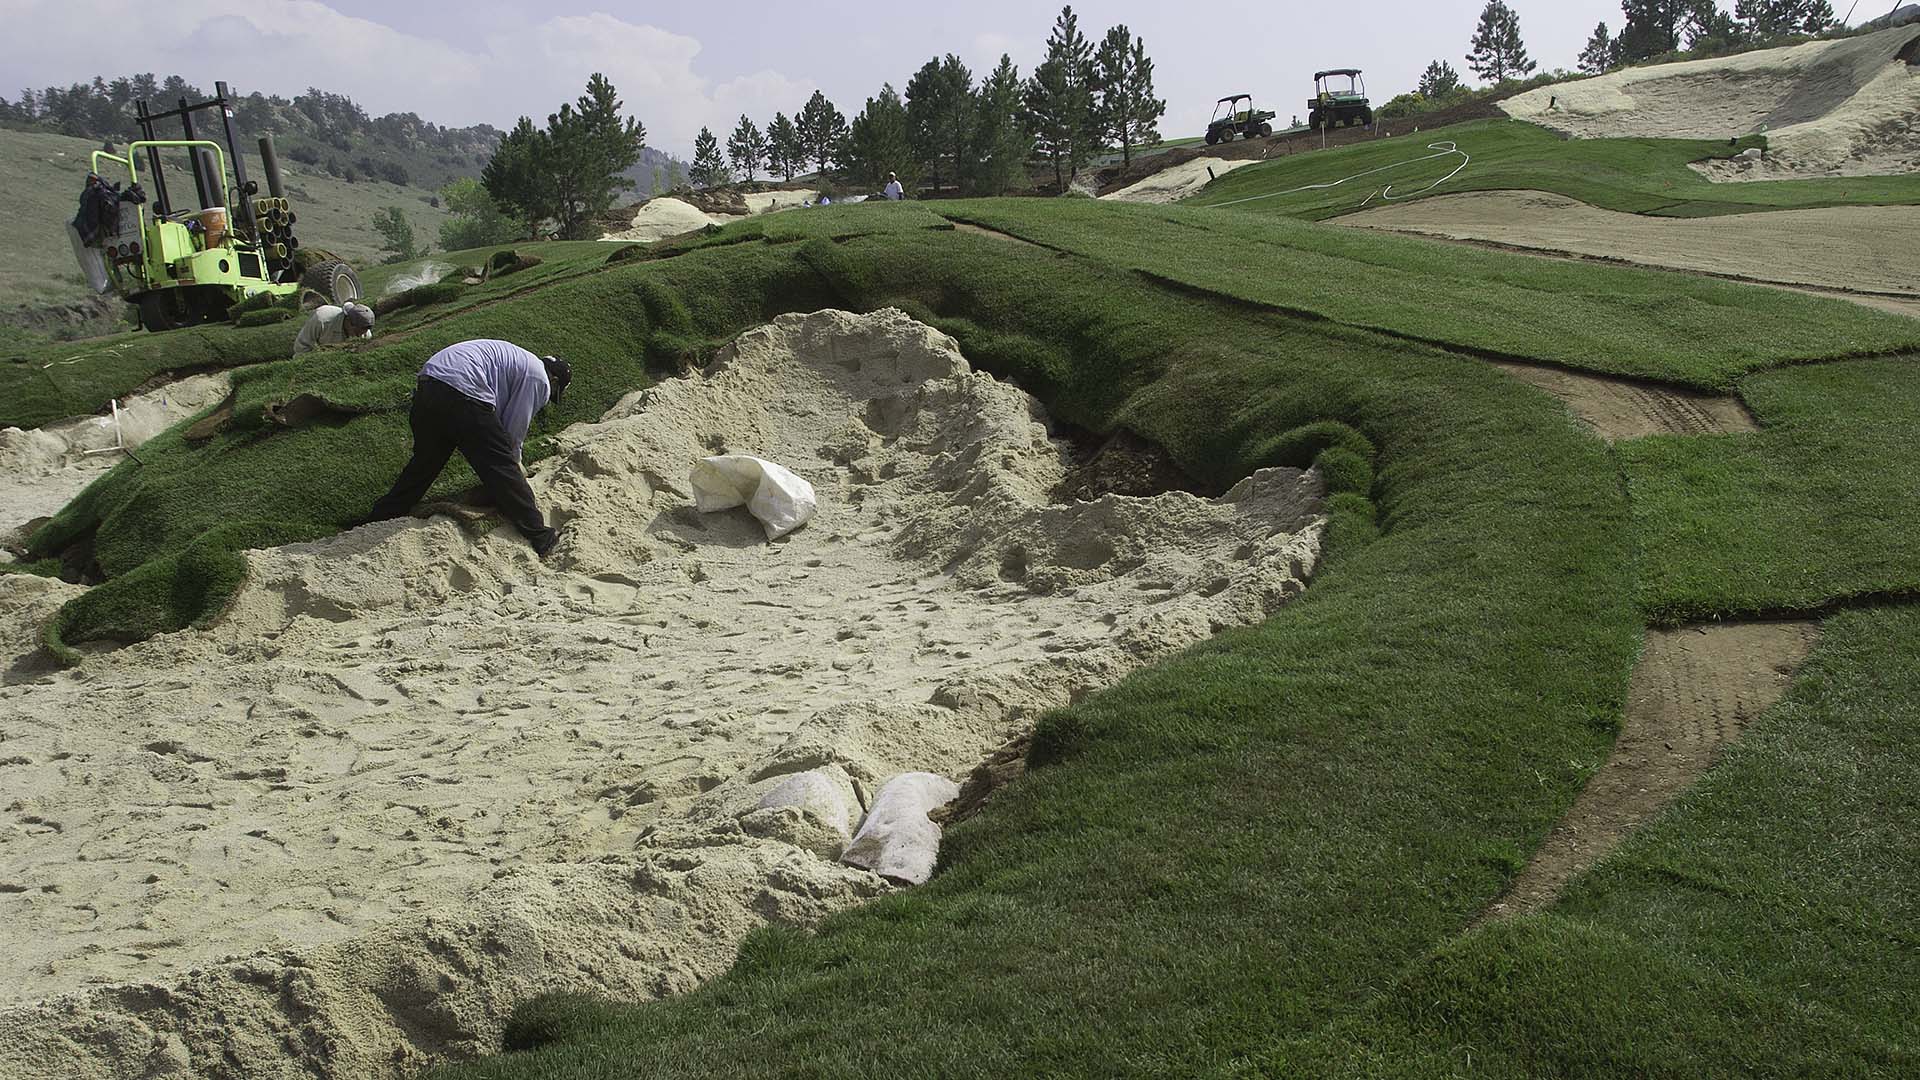 The Club at Ravenna was sodded wall to wall except for greens and tees.